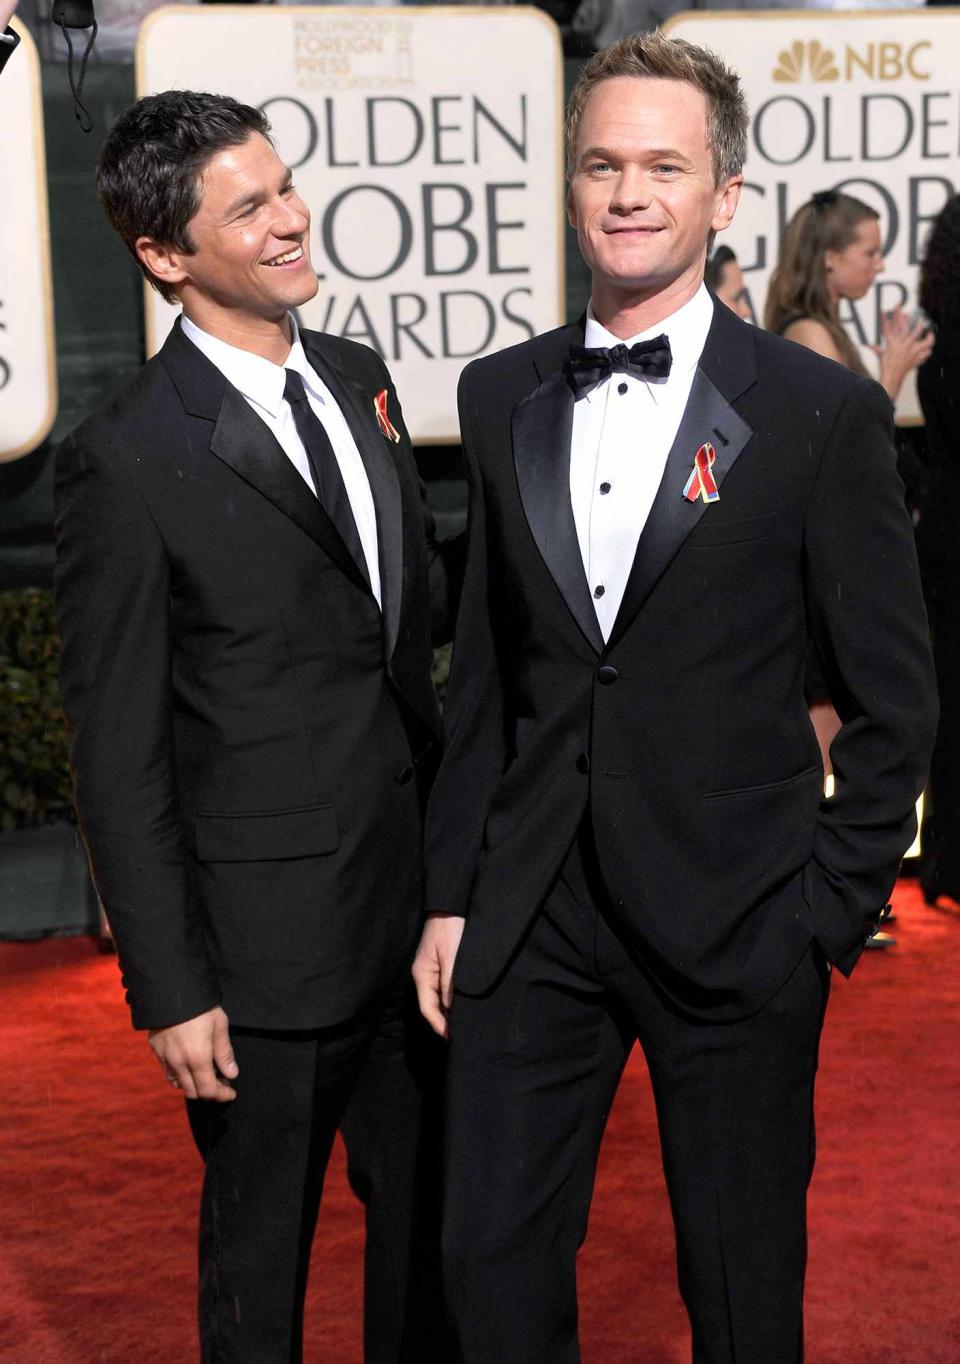 Actor Neil Patrick Harris (R) and David Burtka arrives at the 67th Annual Golden Globe Awards held at The Beverly Hilton Hotel on January 17, 2010 in Beverly Hills, California